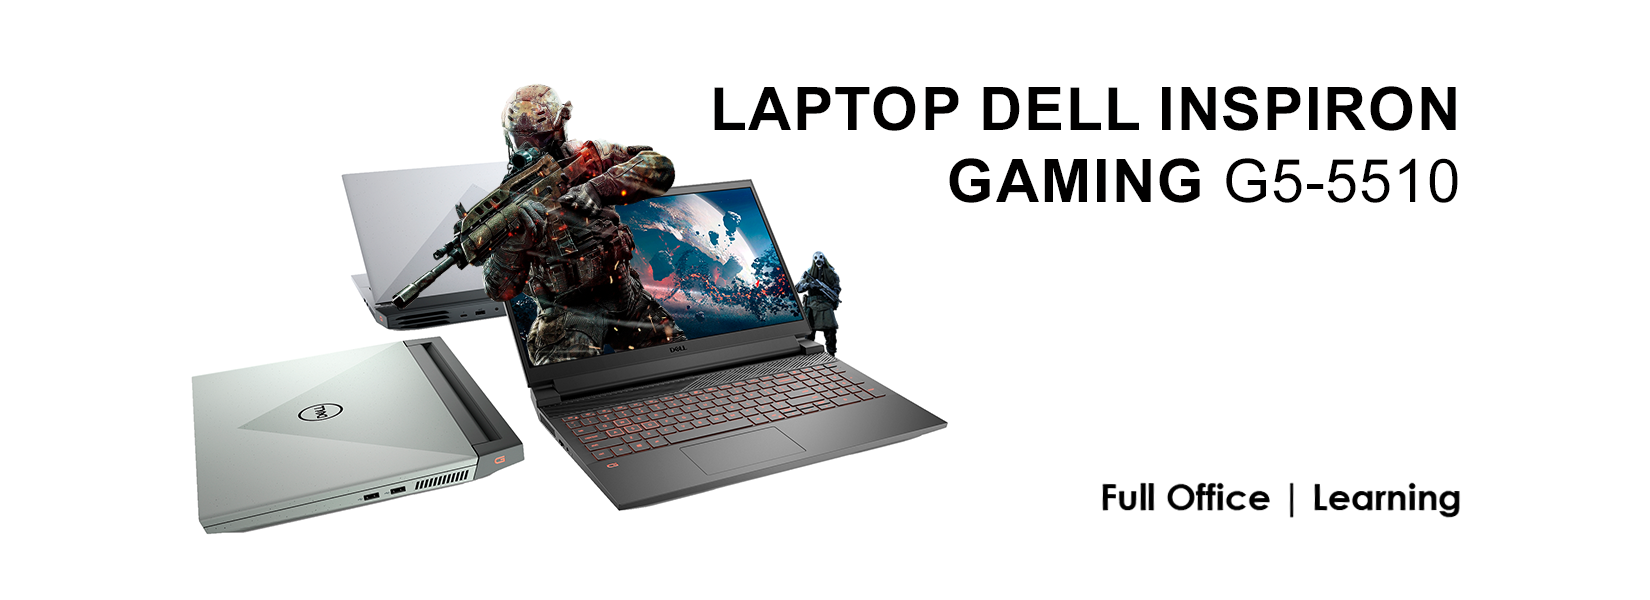 Laptop Dell Inspiron Gaming G5-5510 15.6"